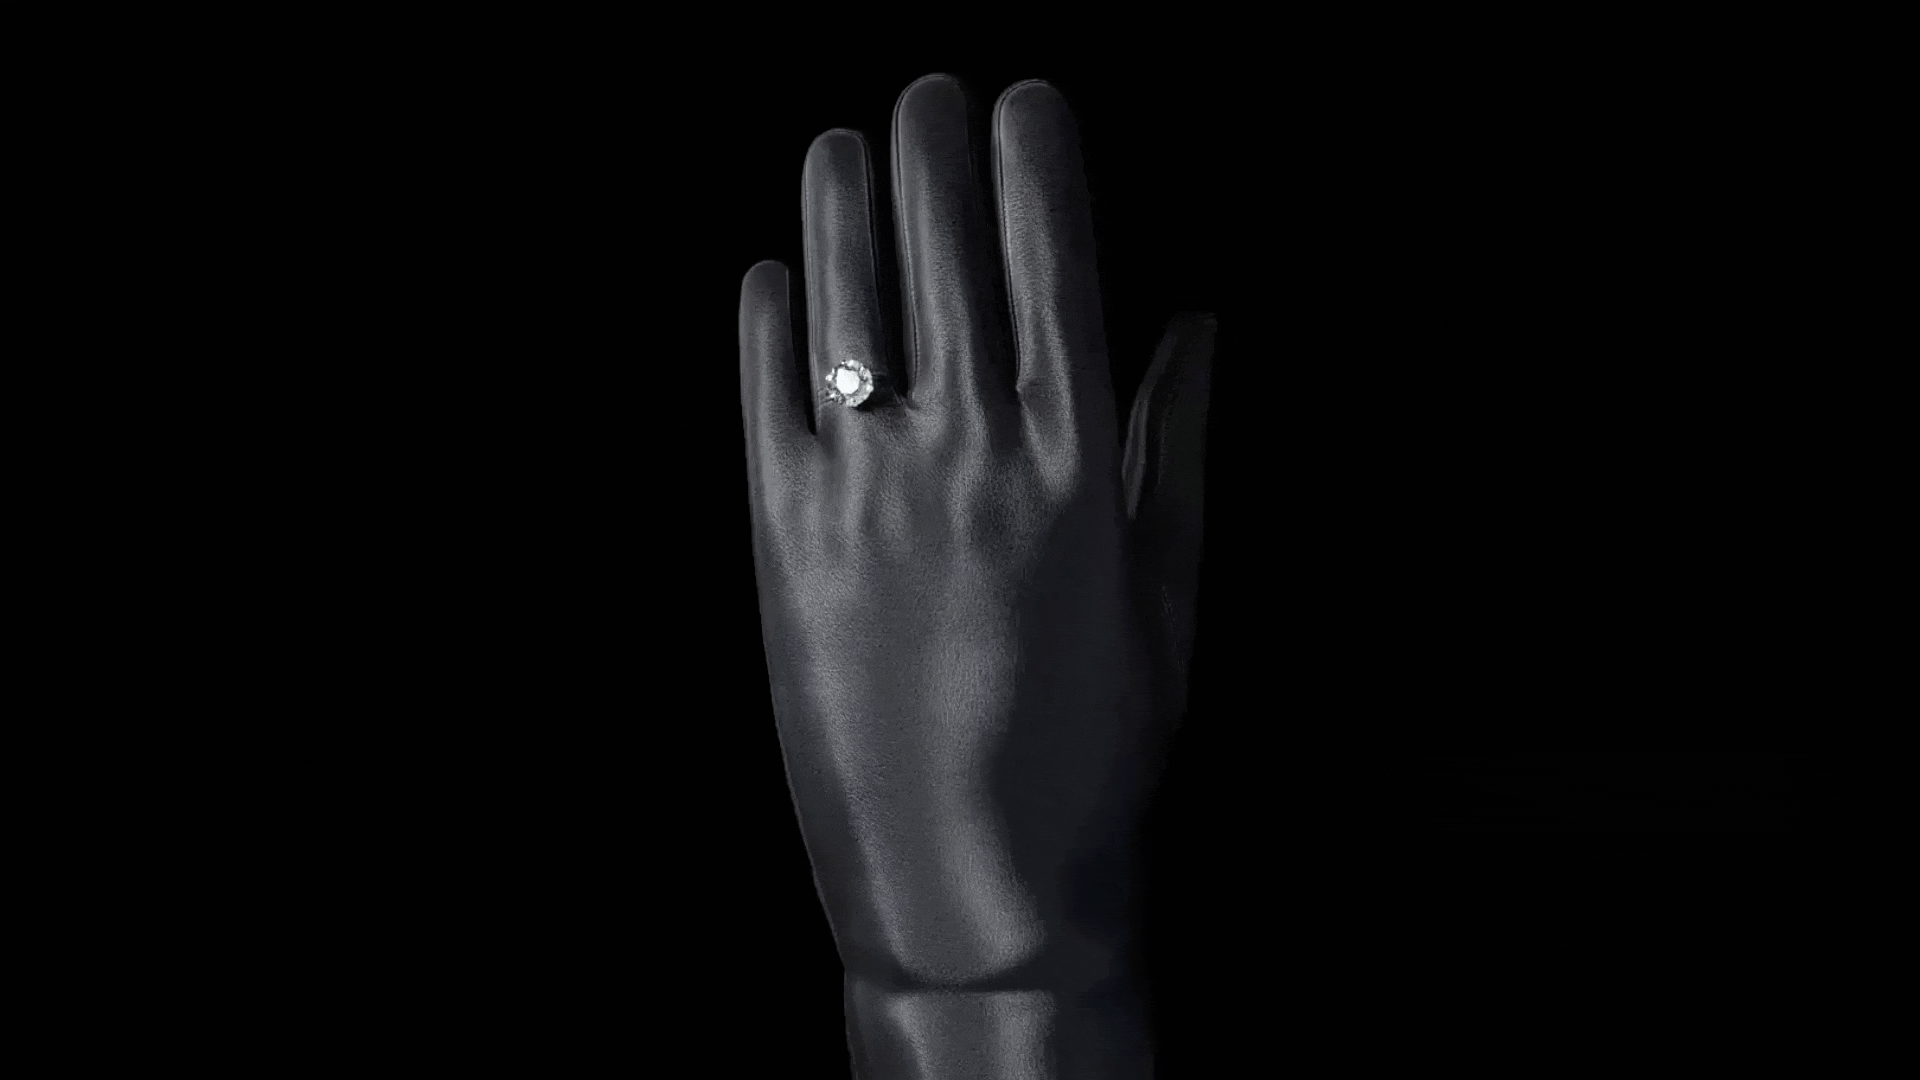 Rotating animated gif of a black left handed glove with a People's diamond ring on the ring finger glistening, protruding through a slit in the glove.